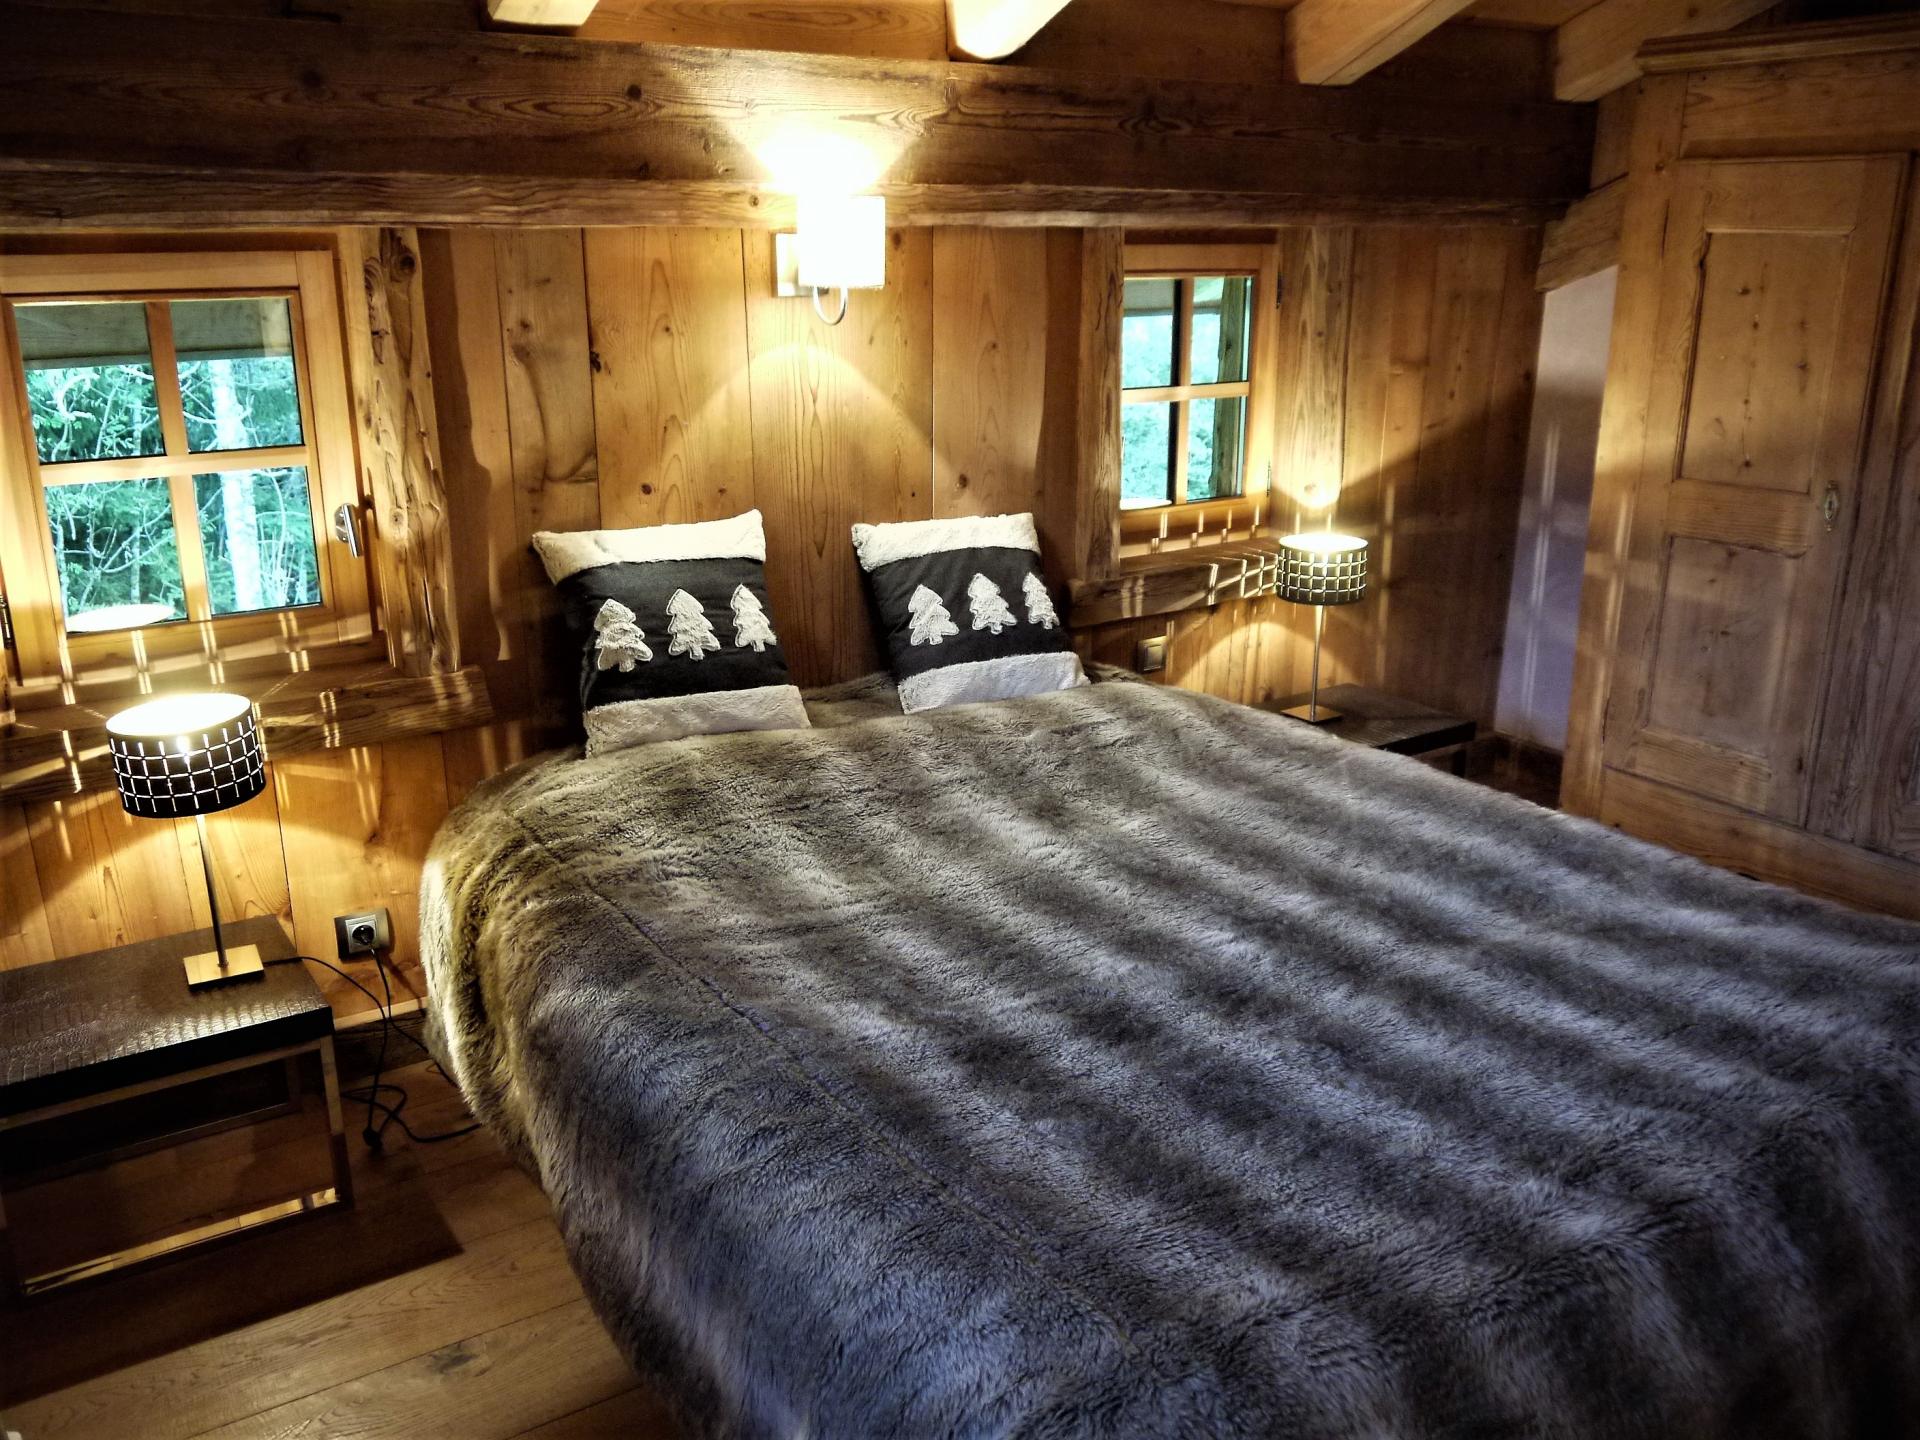 TYPICAL BEDROOM IN A SKI CHALET TO RENT IN THE ALPS